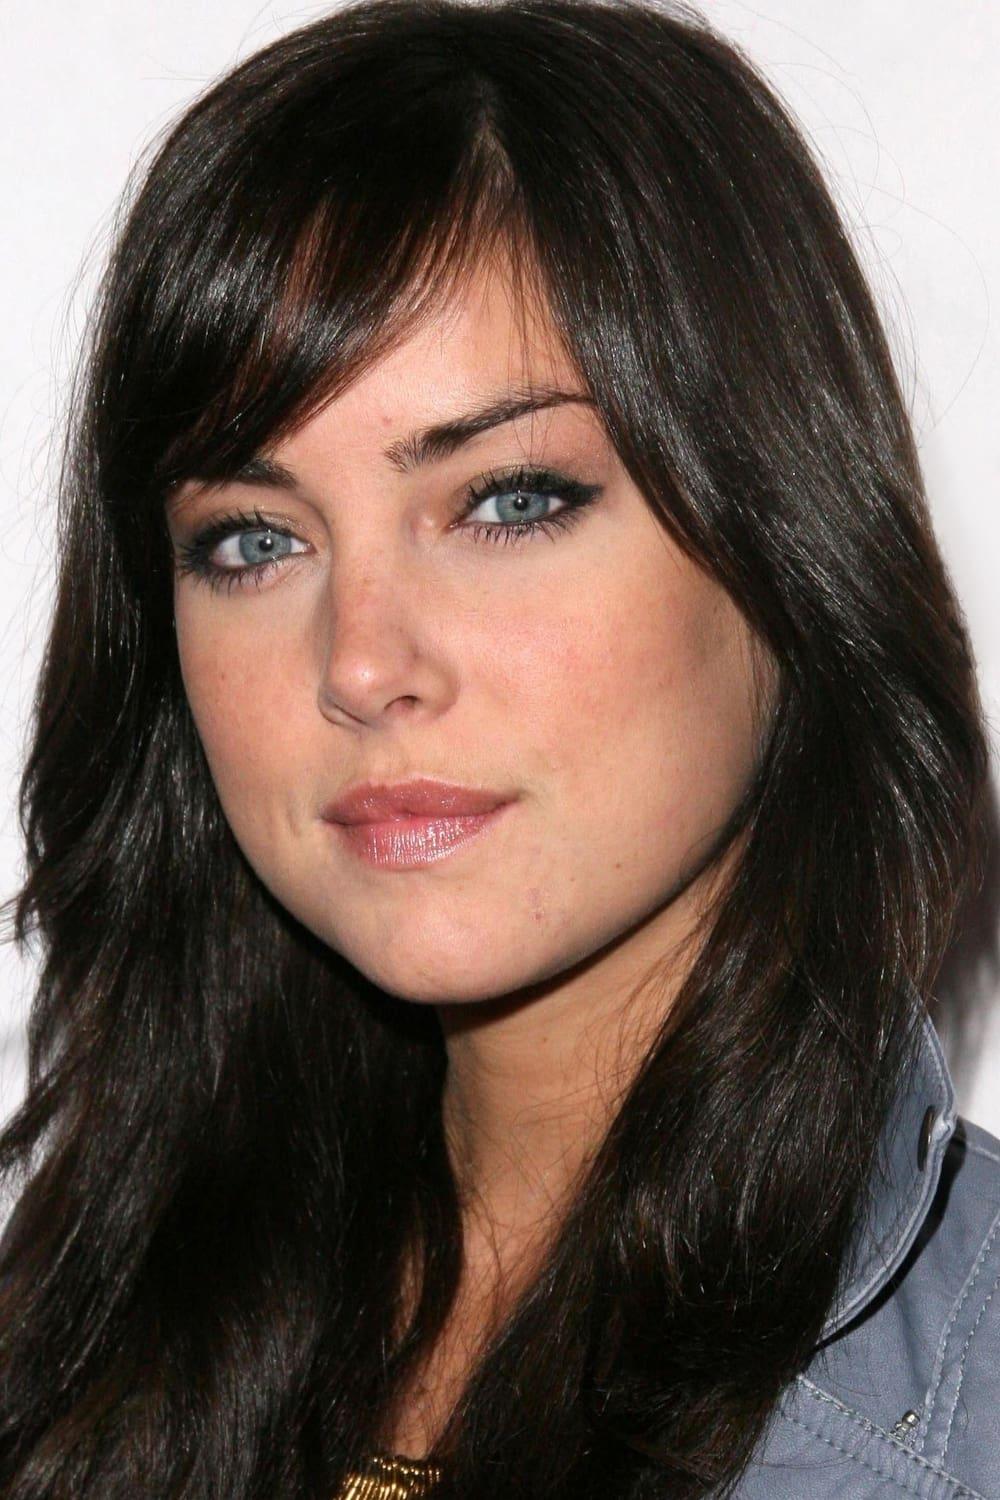 Jessica Stroup poster